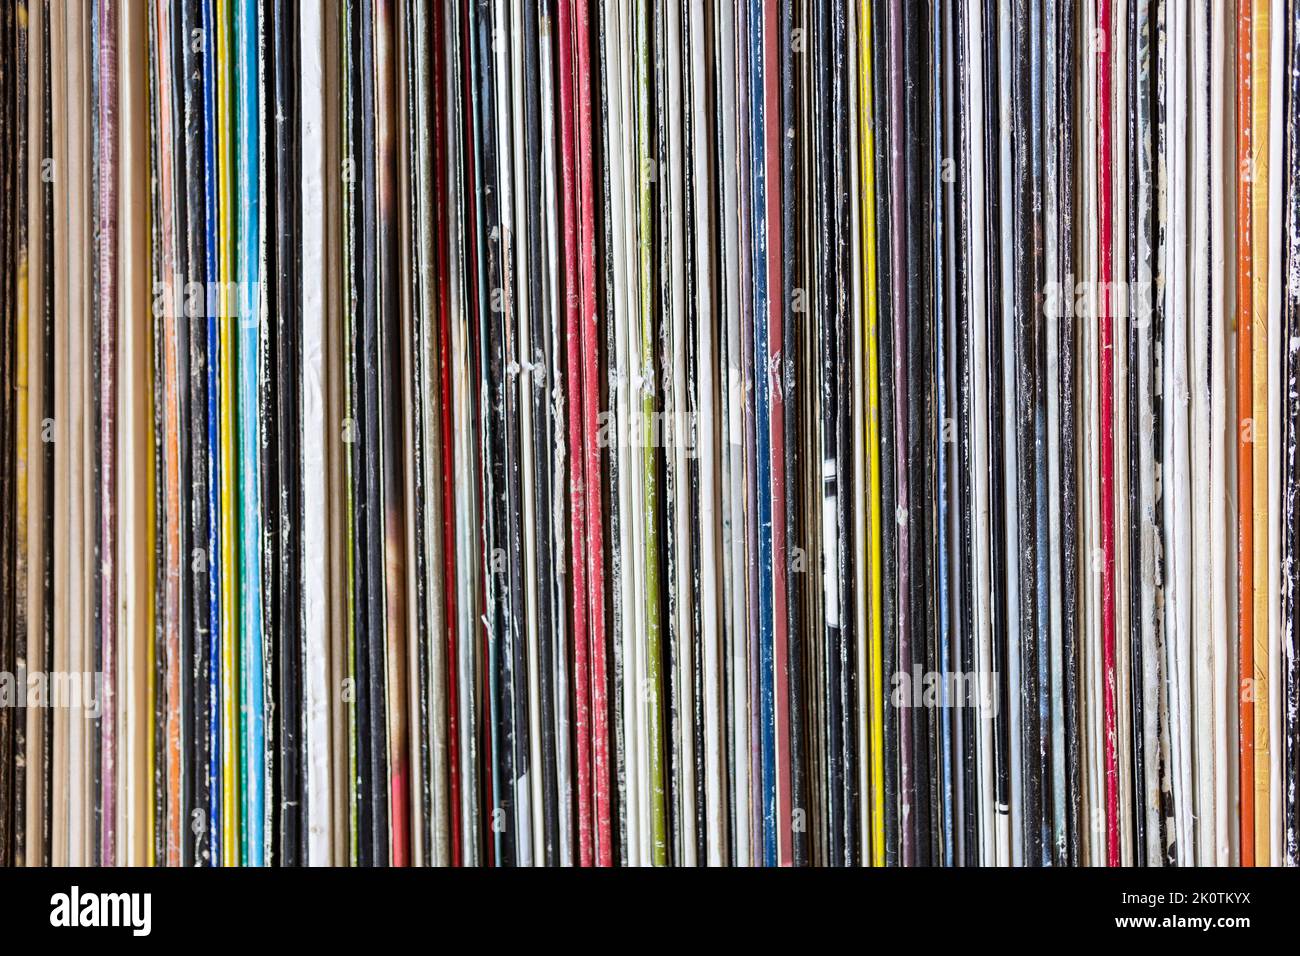  Collected: CDs & Vinyl